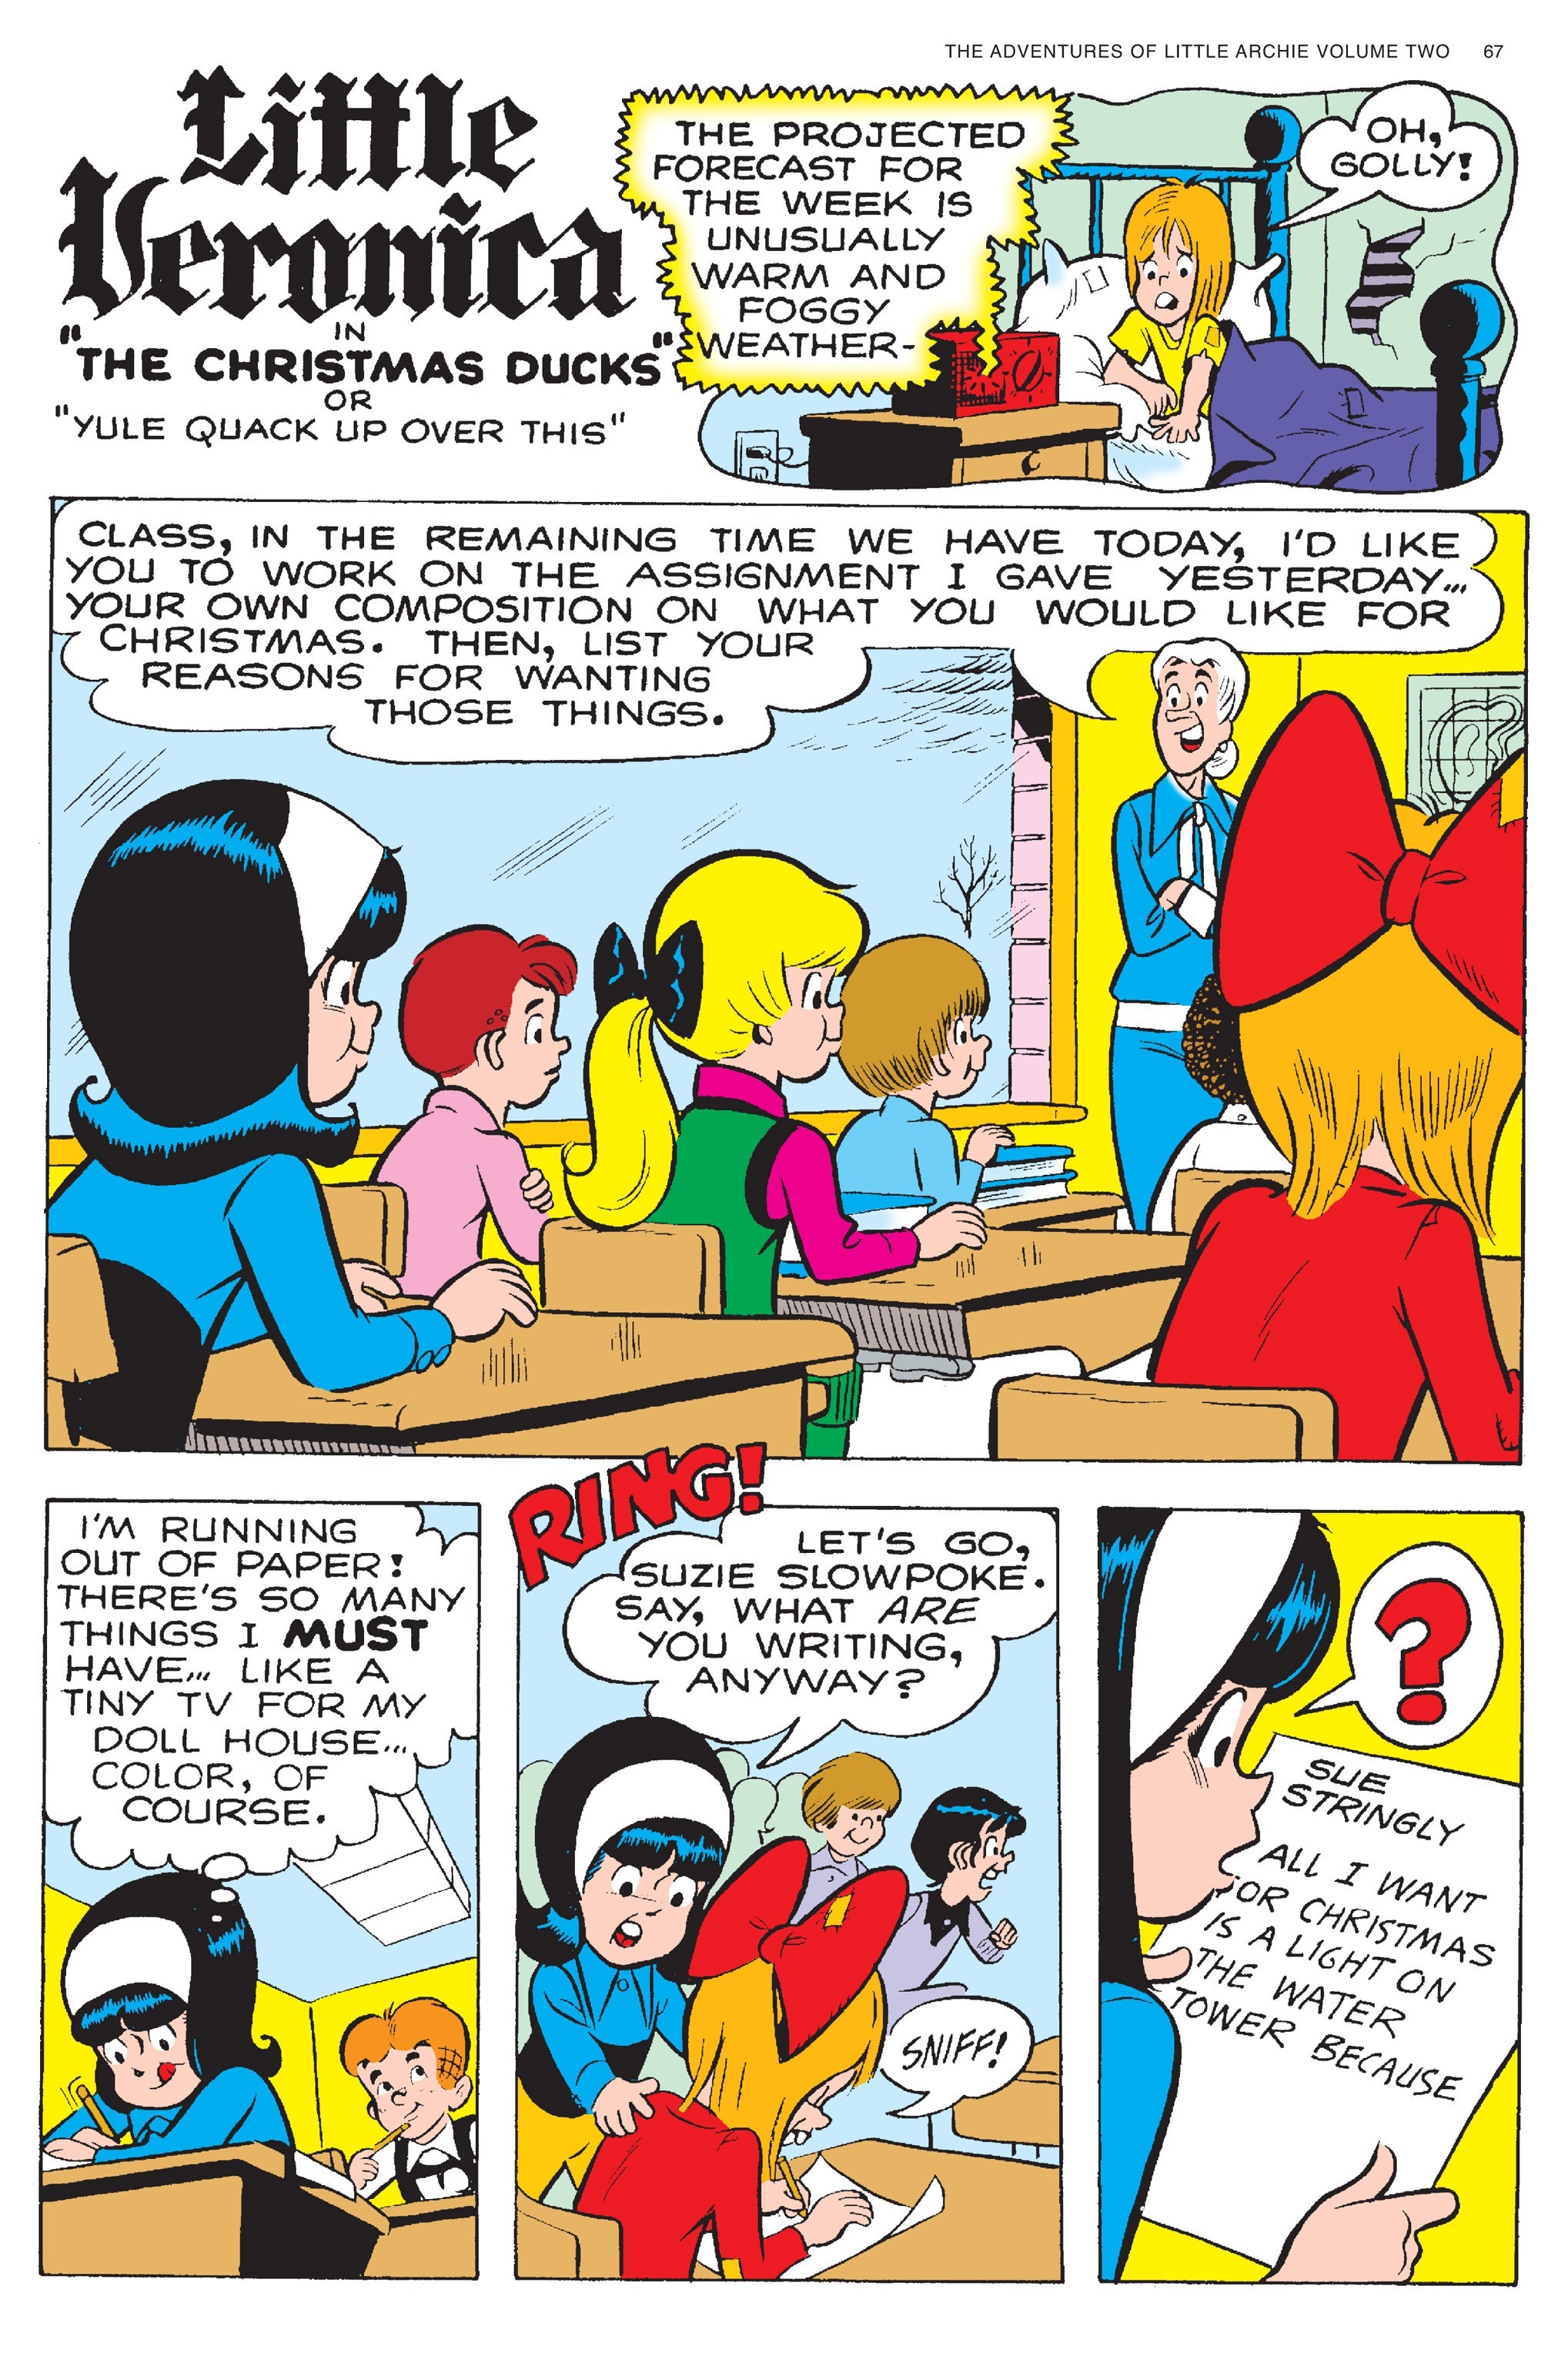 Read online Adventures of Little Archie comic -  Issue # TPB 2 - 68